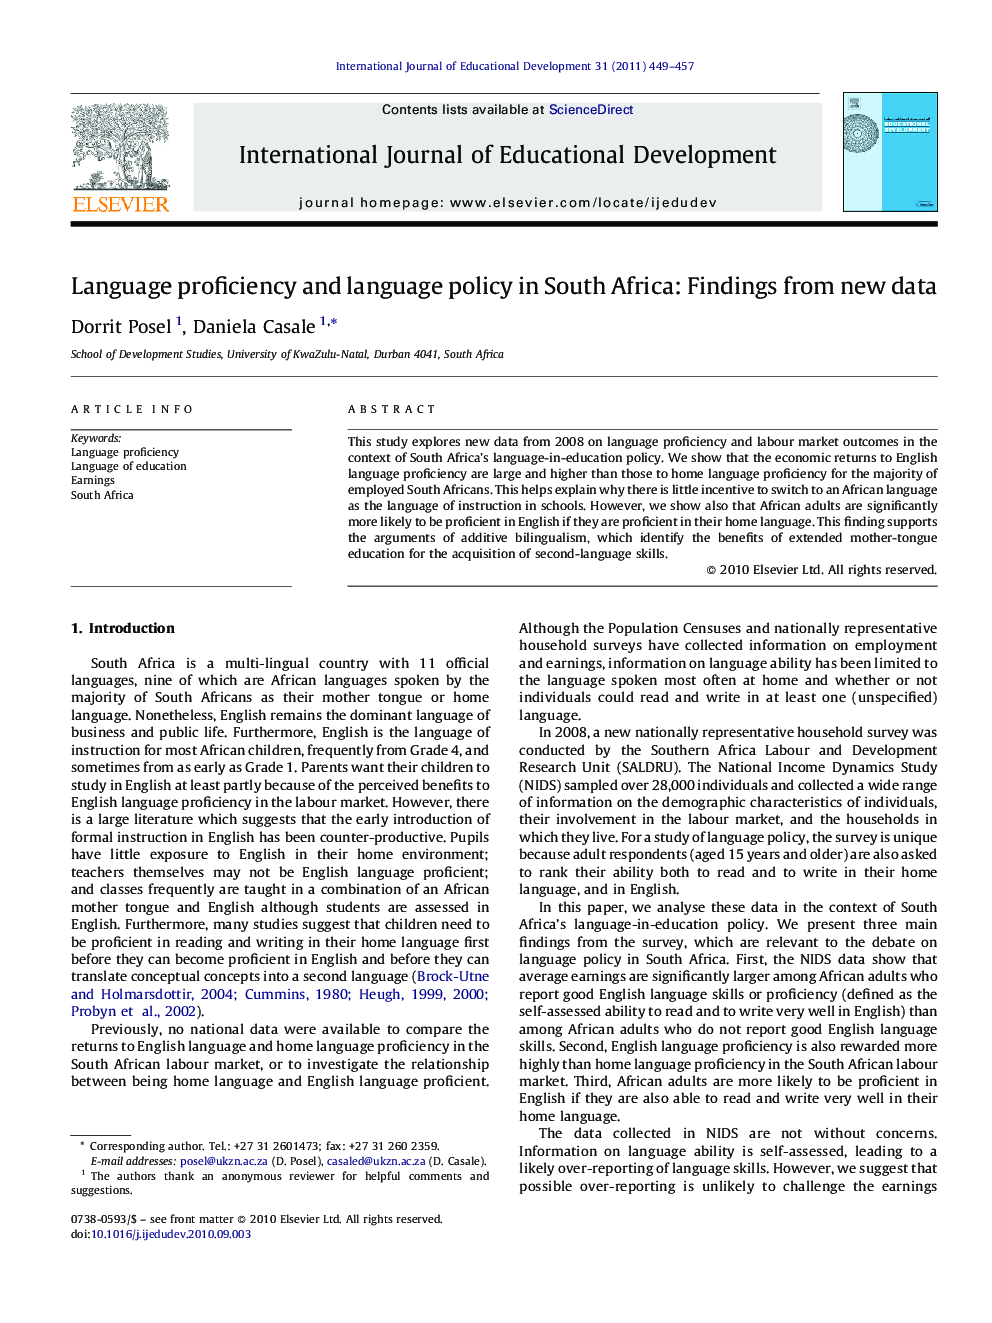 Language proficiency and language policy in South Africa: Findings from new data